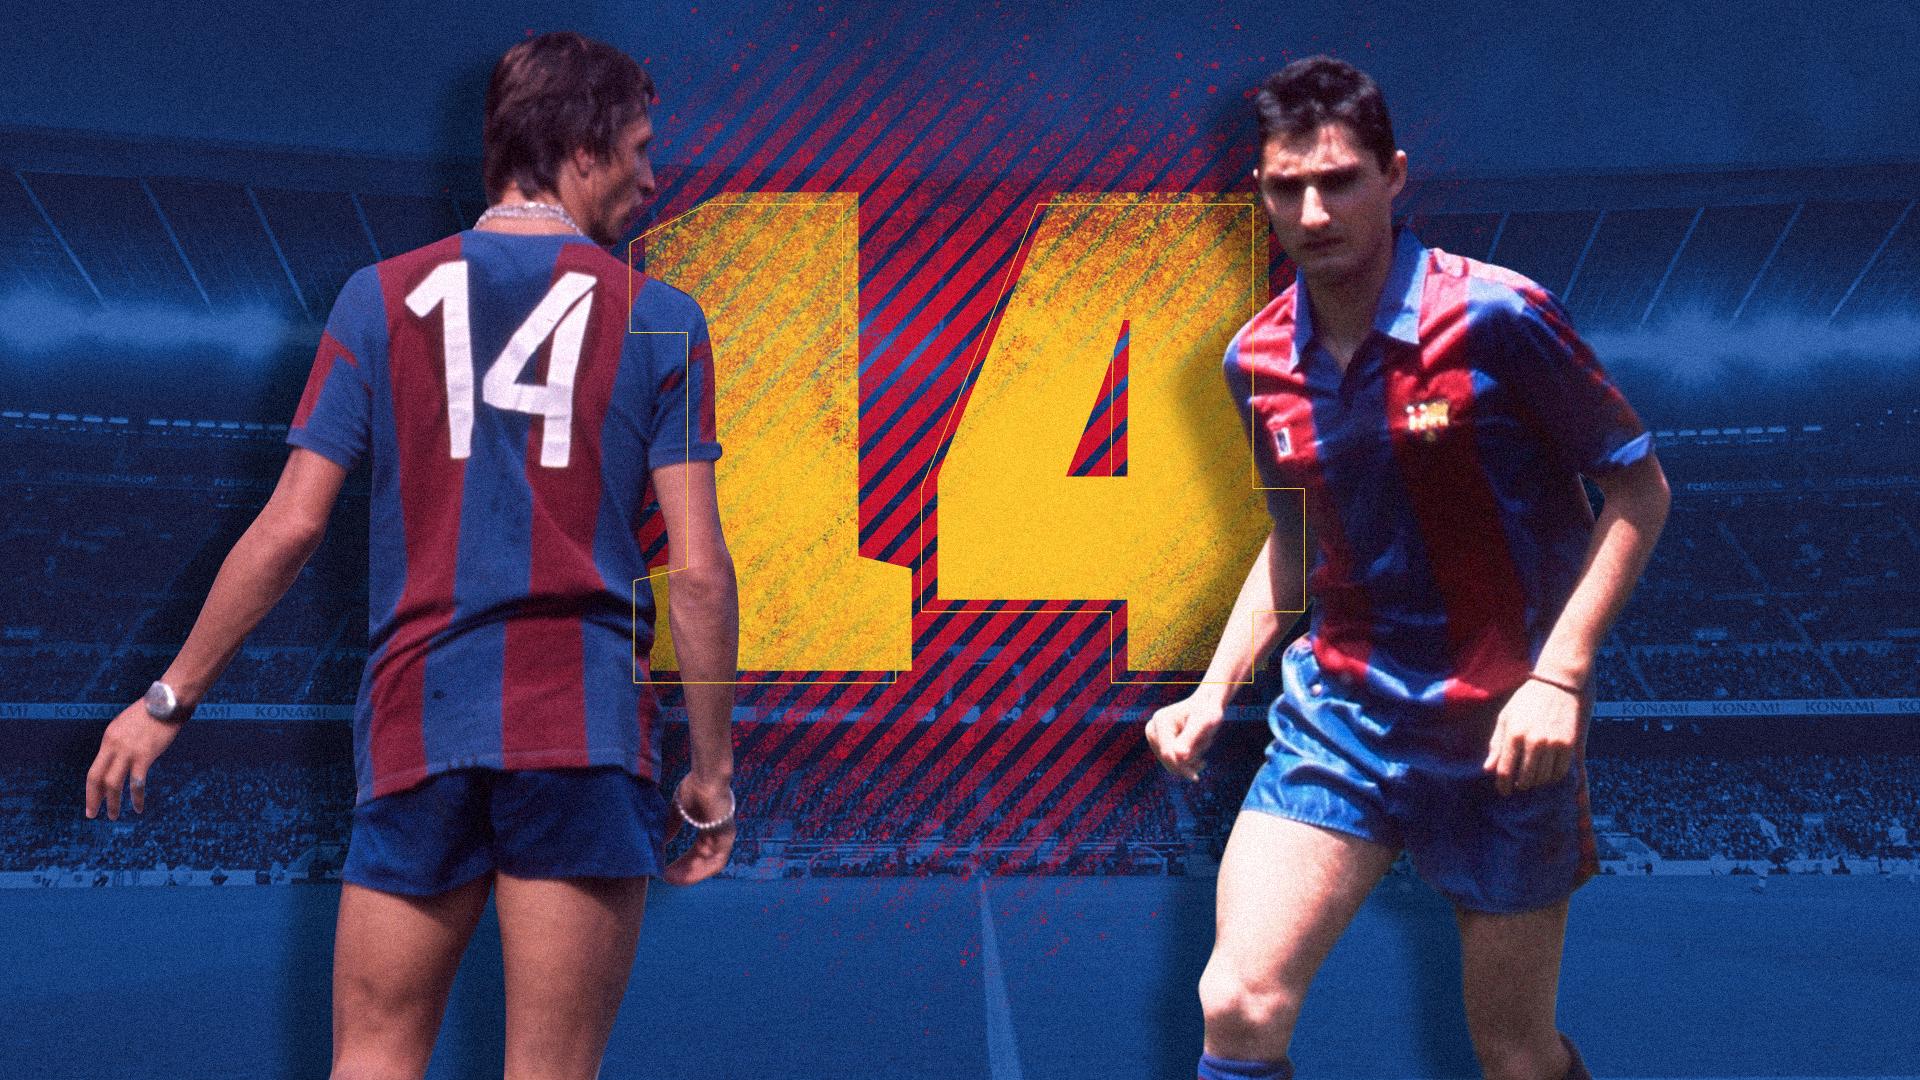 The number 14, Cruyff and Valverde